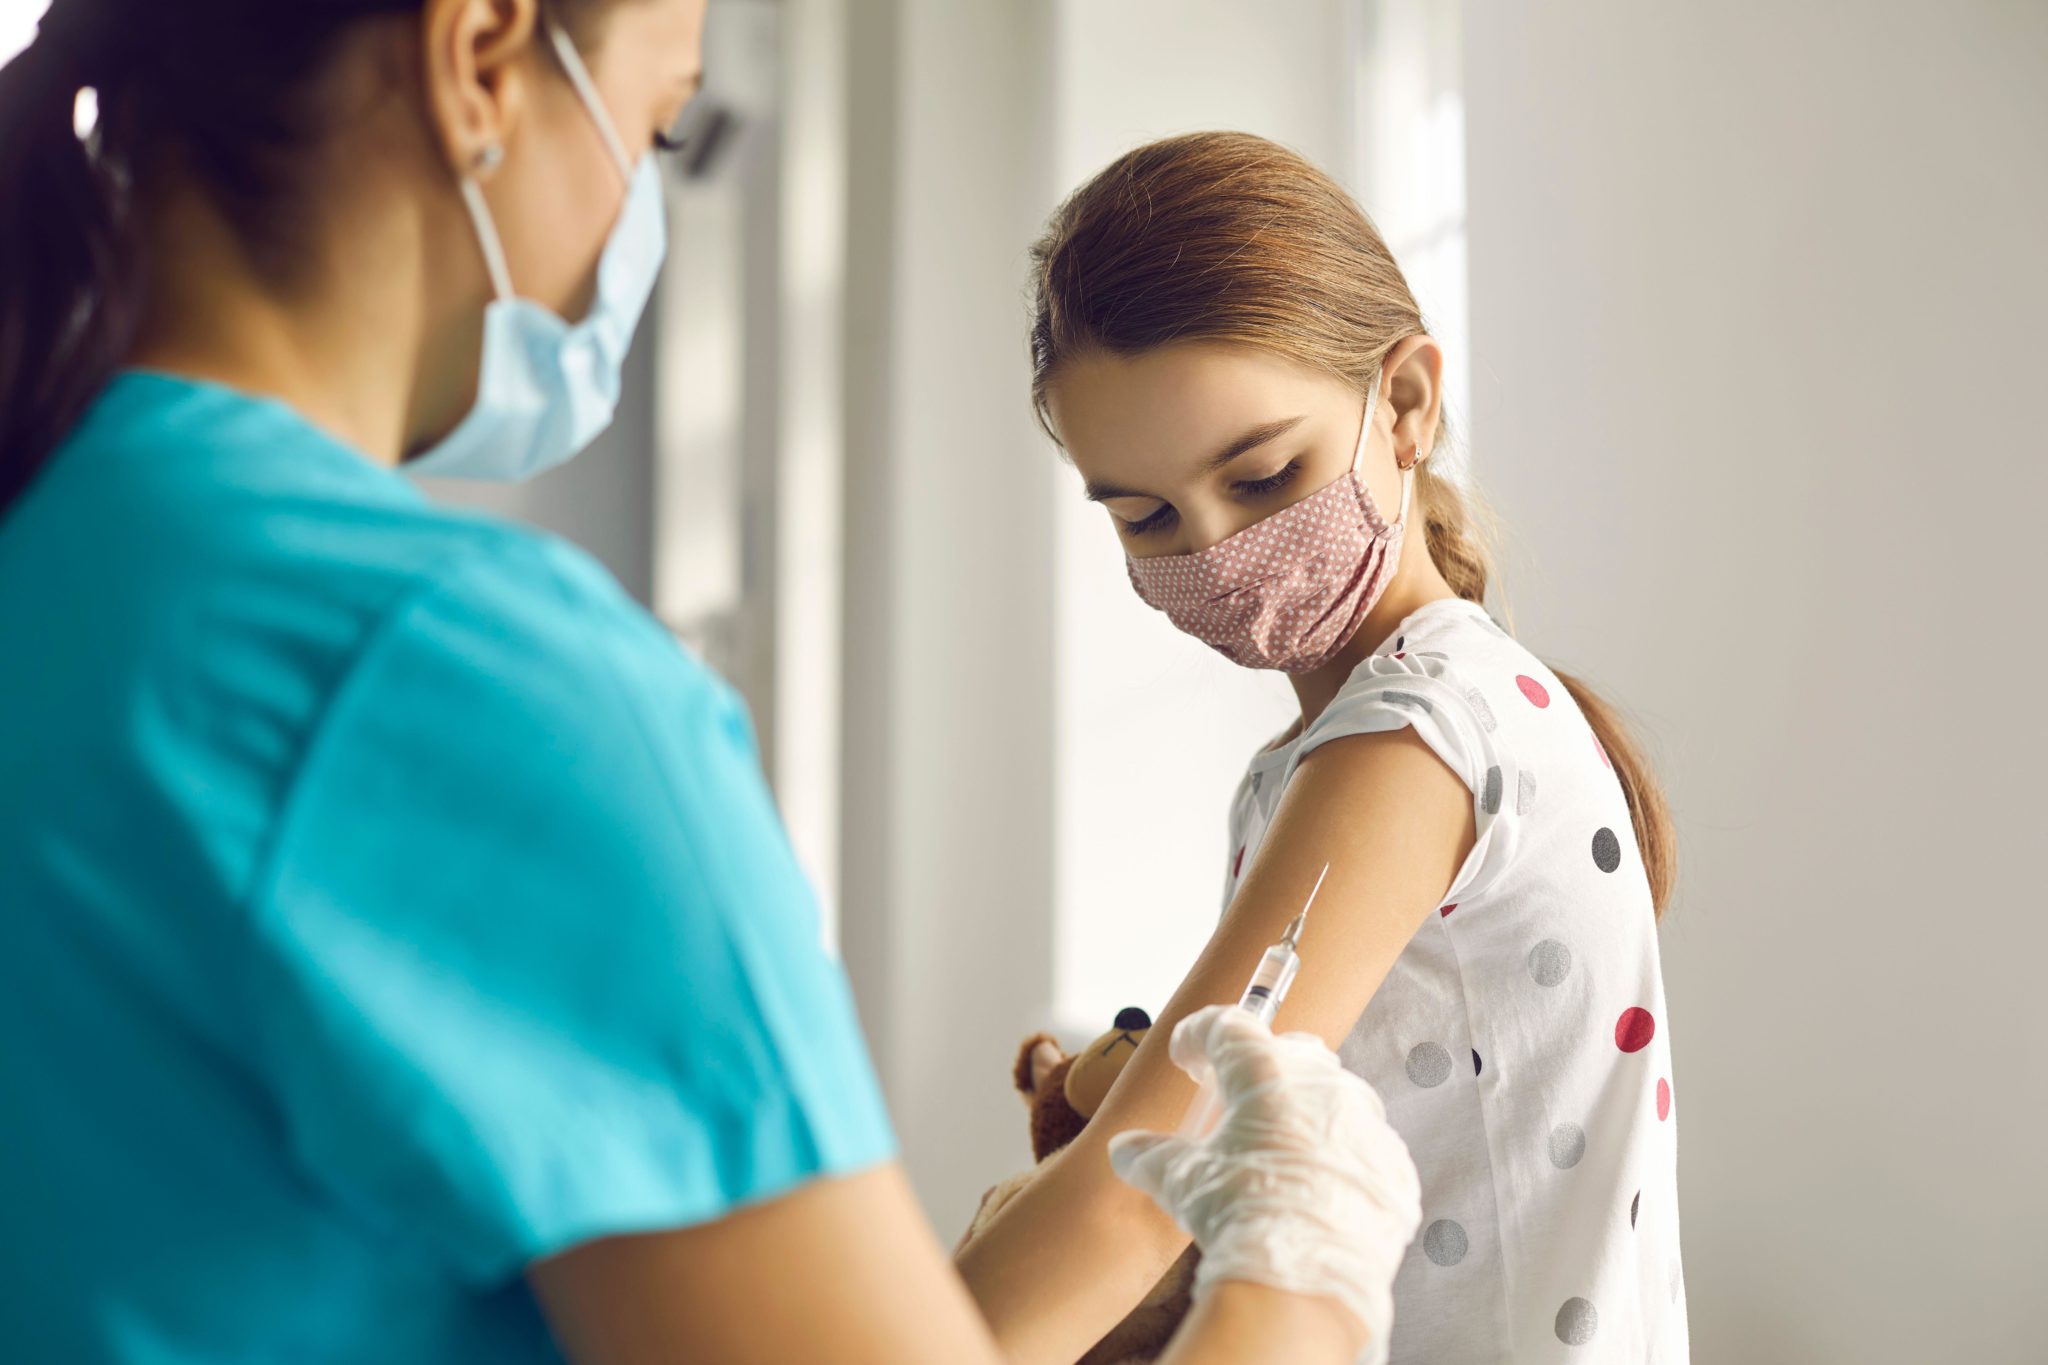 A child getting a vaccine shot at the doctor's office. Image: Roman Lacheev / Alamy Stock Photo